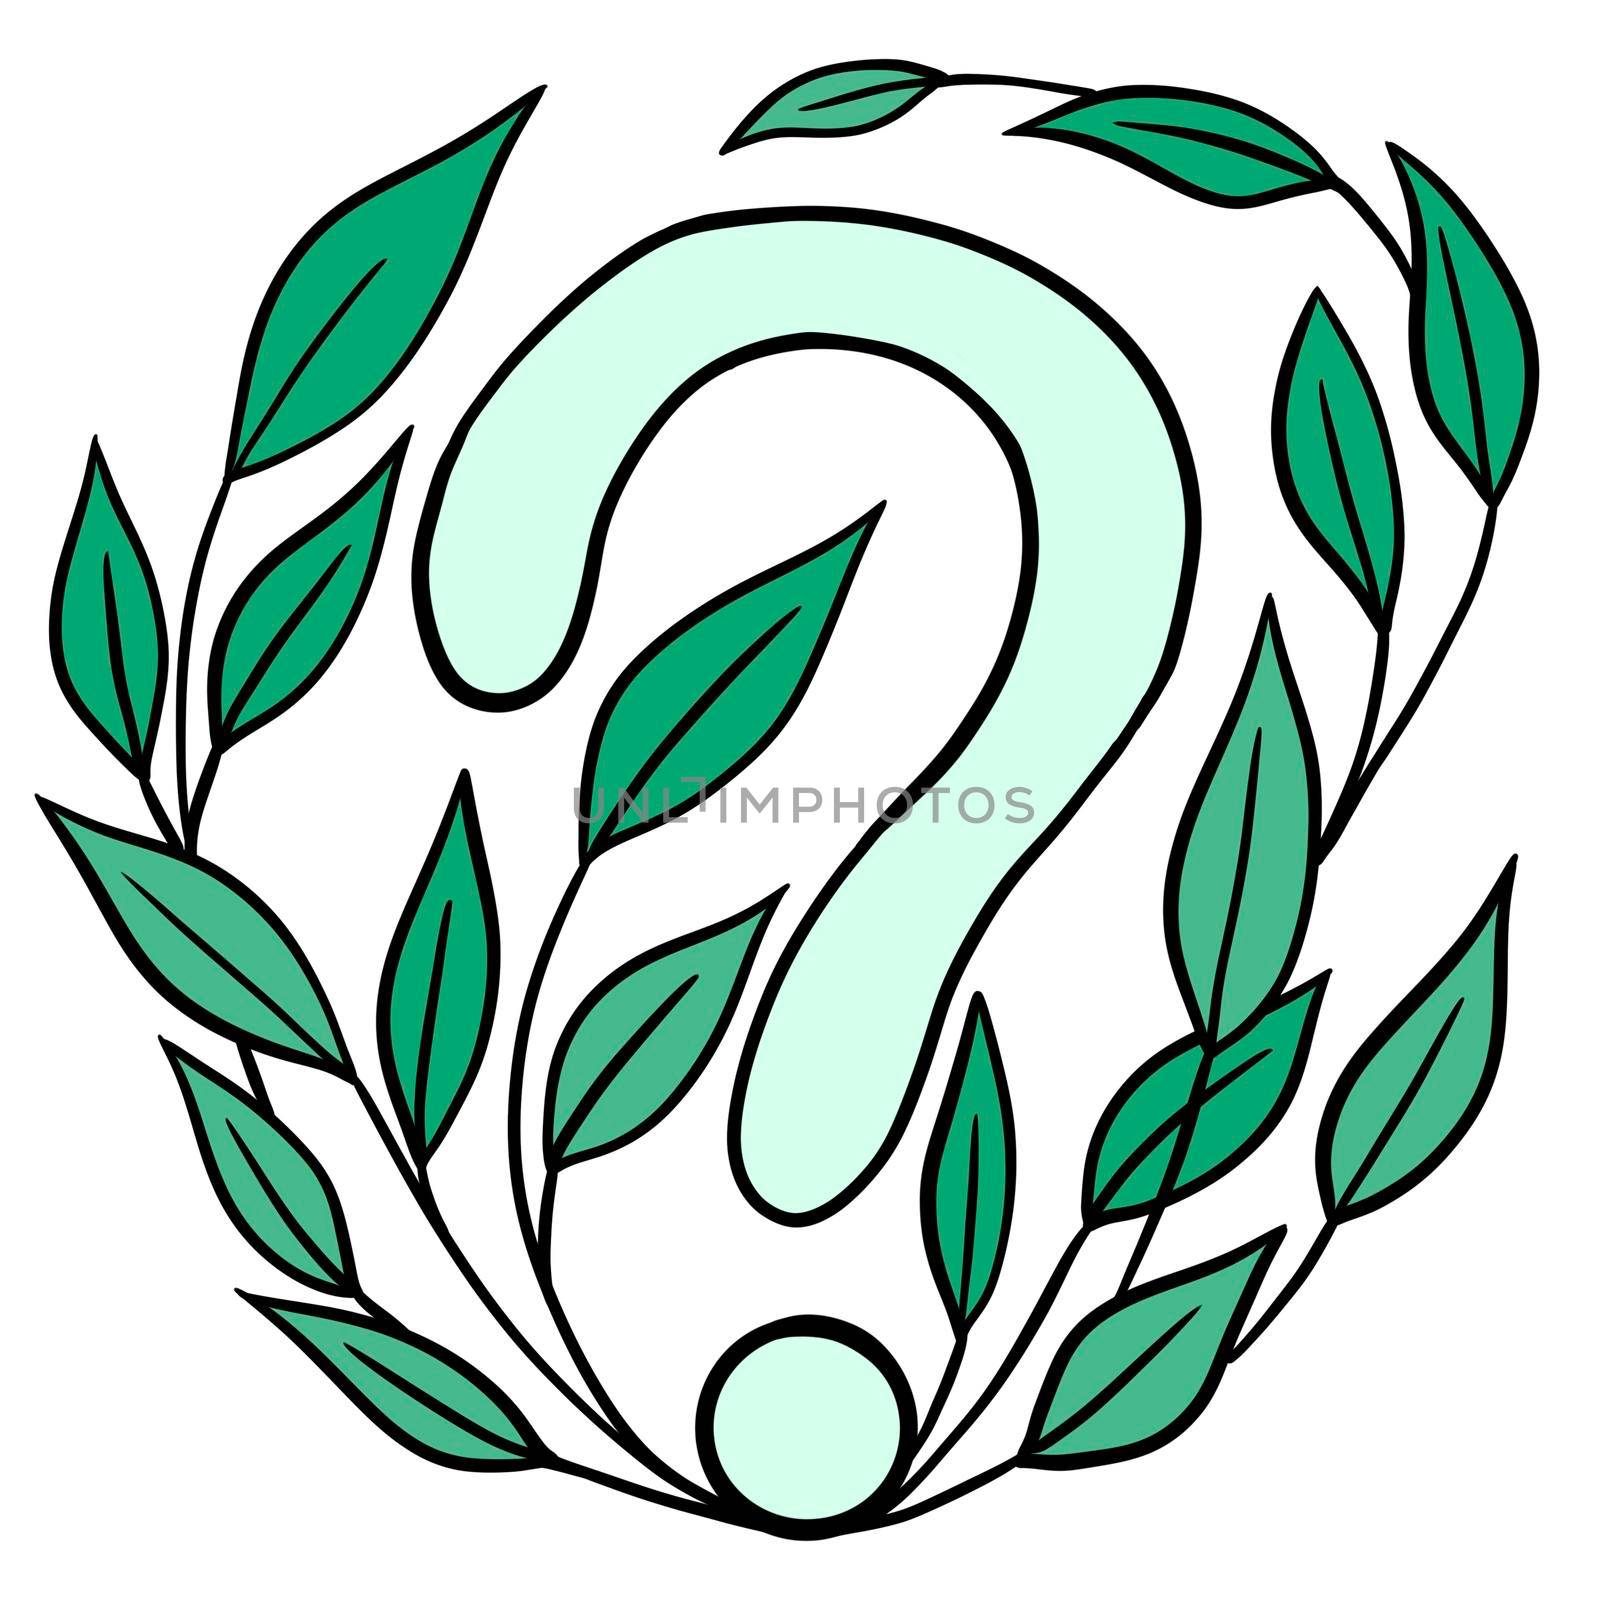 Hand drawn illustration of question mark with leaves flowers nature elements. Why concept for ecology environment environmental causes. Simple minimalist design with black line outline silhouette, spring summer print